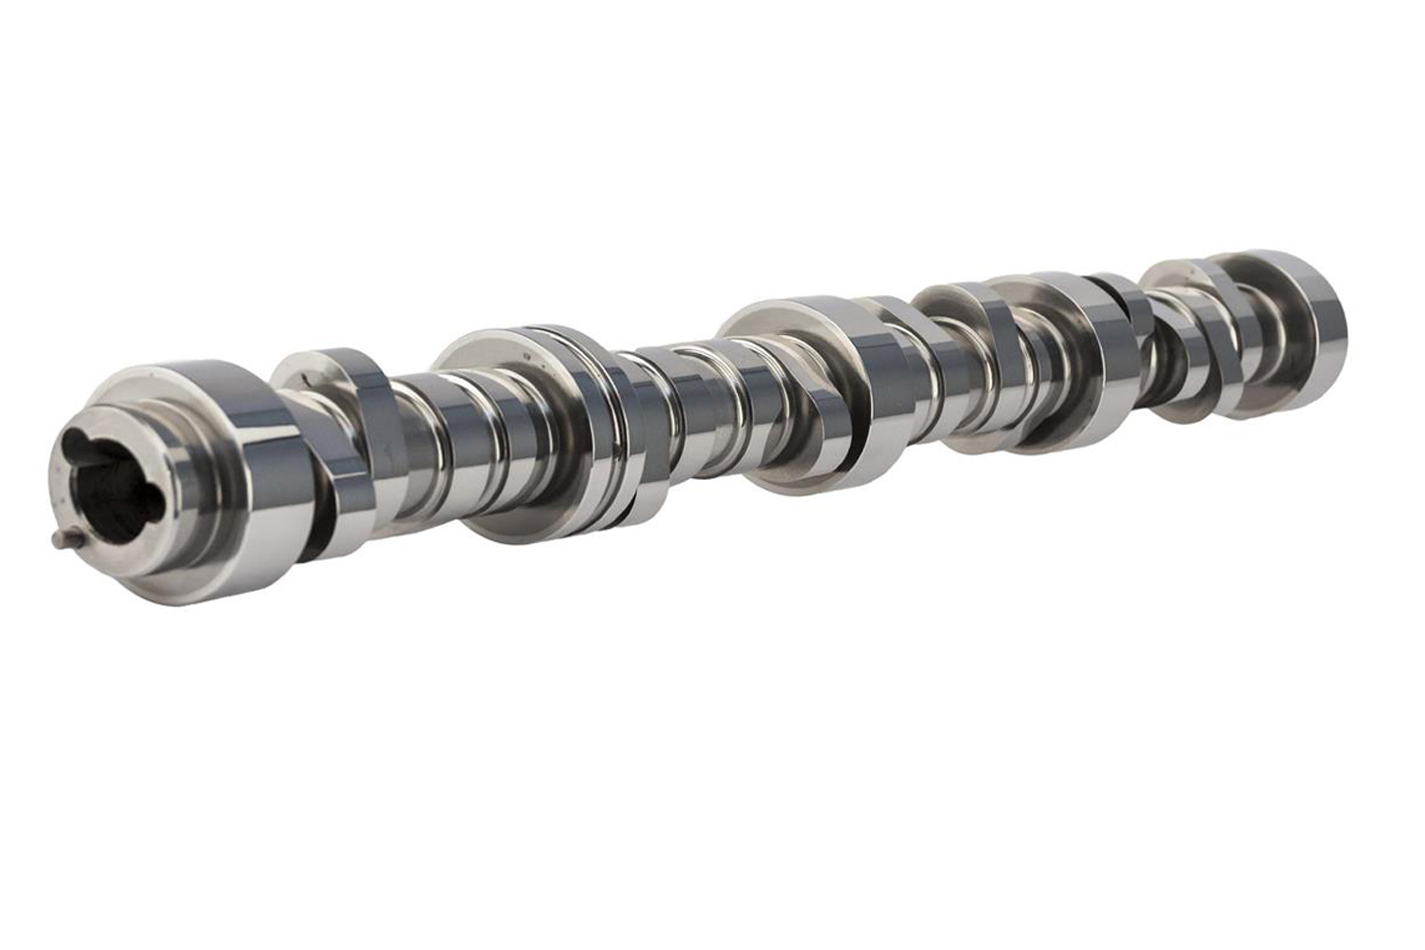 Comp Cams 54-332-11 Camshaft, LST Stage 2, Hydraulic Roller, Lift 0.605 / 0.610 in, Duration 286 / 292, 115 LSA, 2500 / 7400 RPM, GM LS-Series, Each